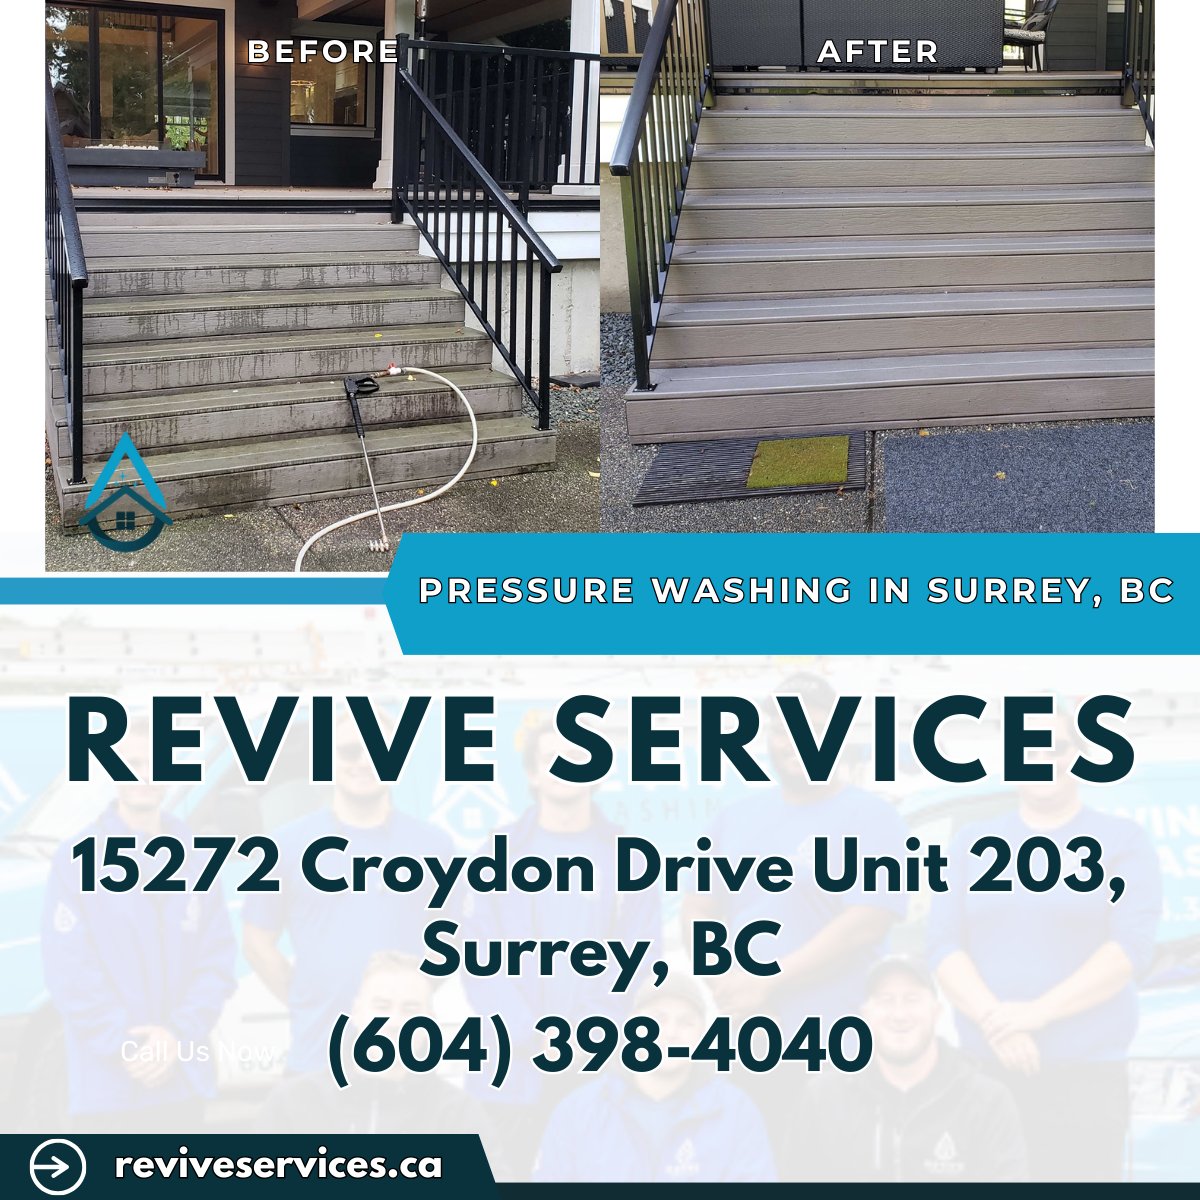 Pressure Washing in Surrey, BC - Revive Services

reviveservices.ca/services/press…

Revive Services
15272 Croydon Dr #203
Surrey, BC V3S 0Z5, Canada
604-398-4040

maps.google.com/maps?ll=49.059…

#PressureWashing #PressureWashingSurreyBC